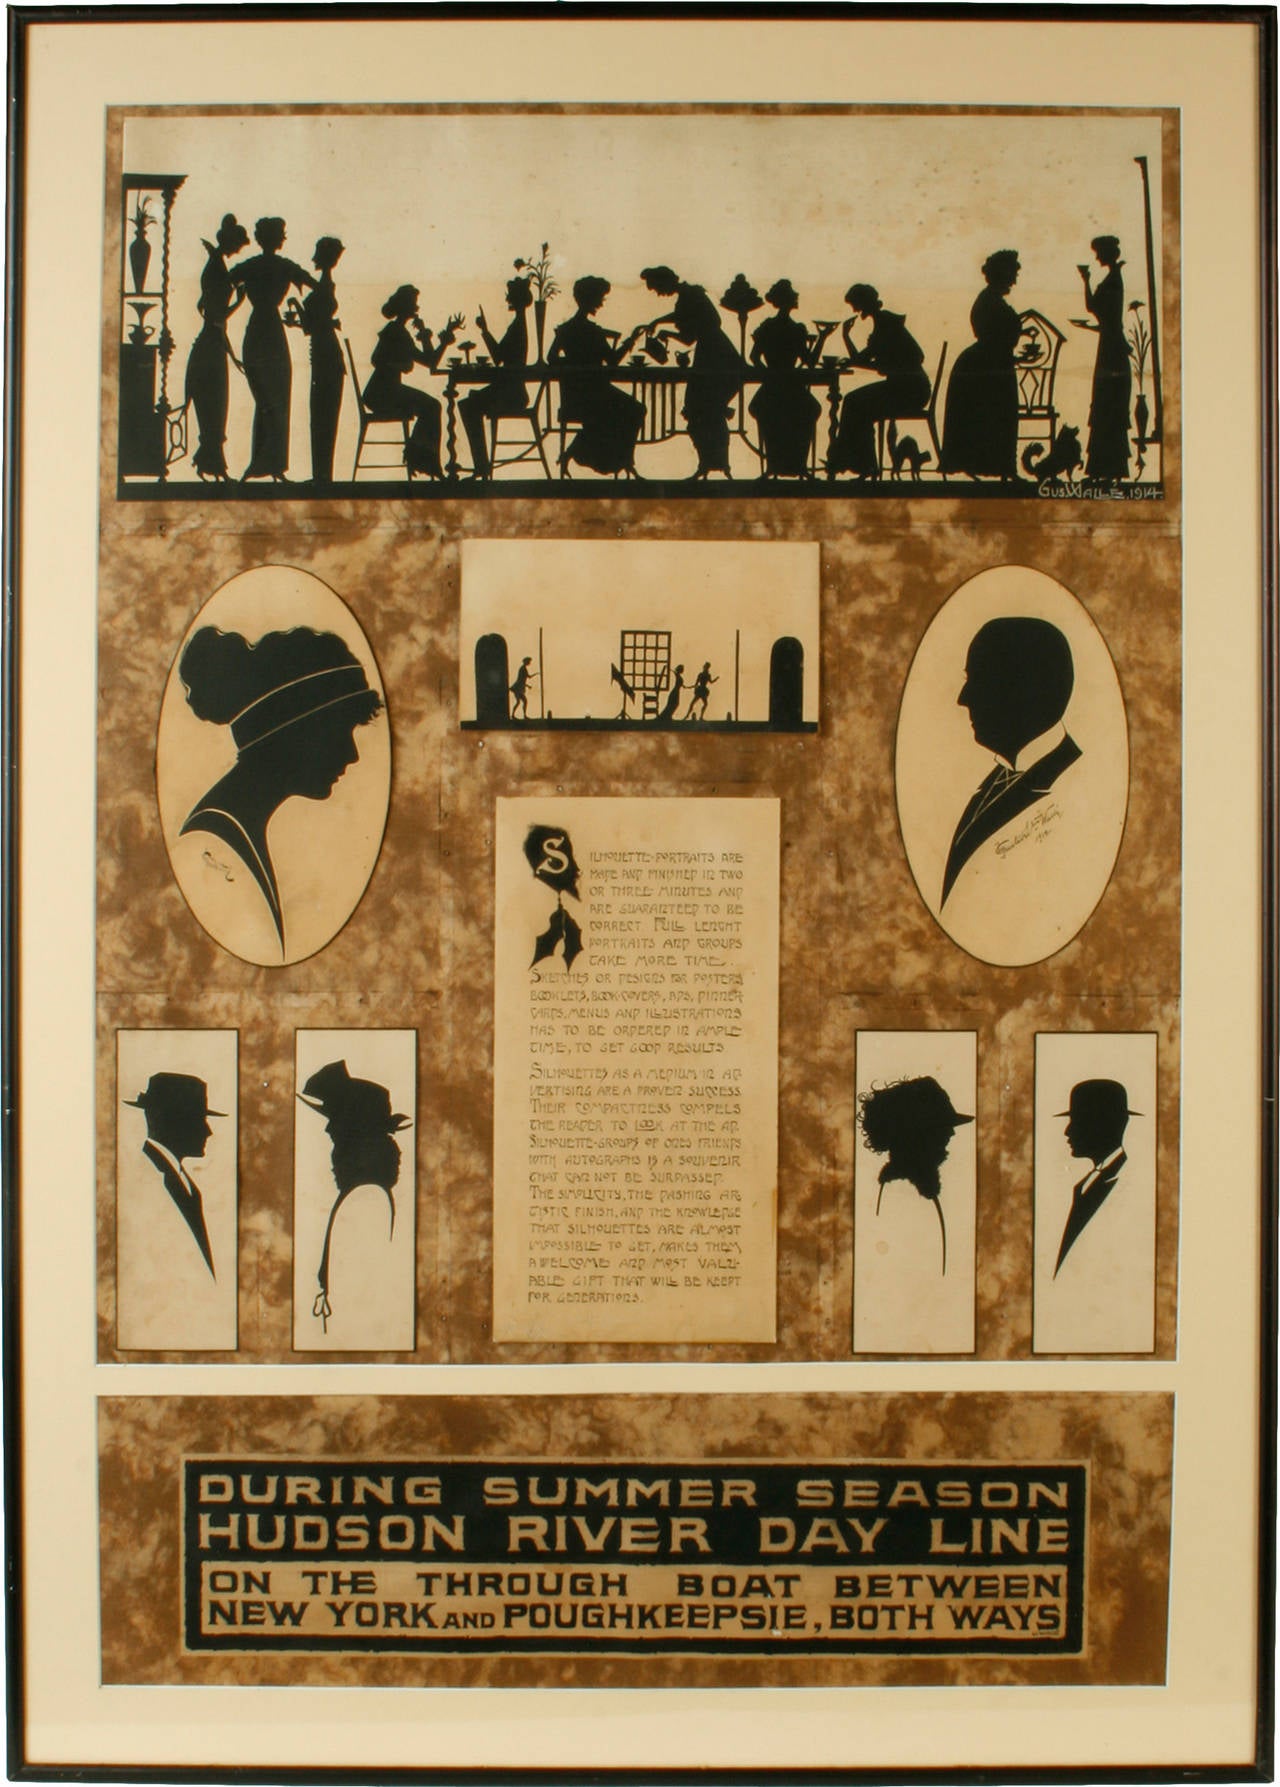 Art Deco Three Hand-Cut Promotional Posters by Silhouette Artist G. C. Walle, circa 1913